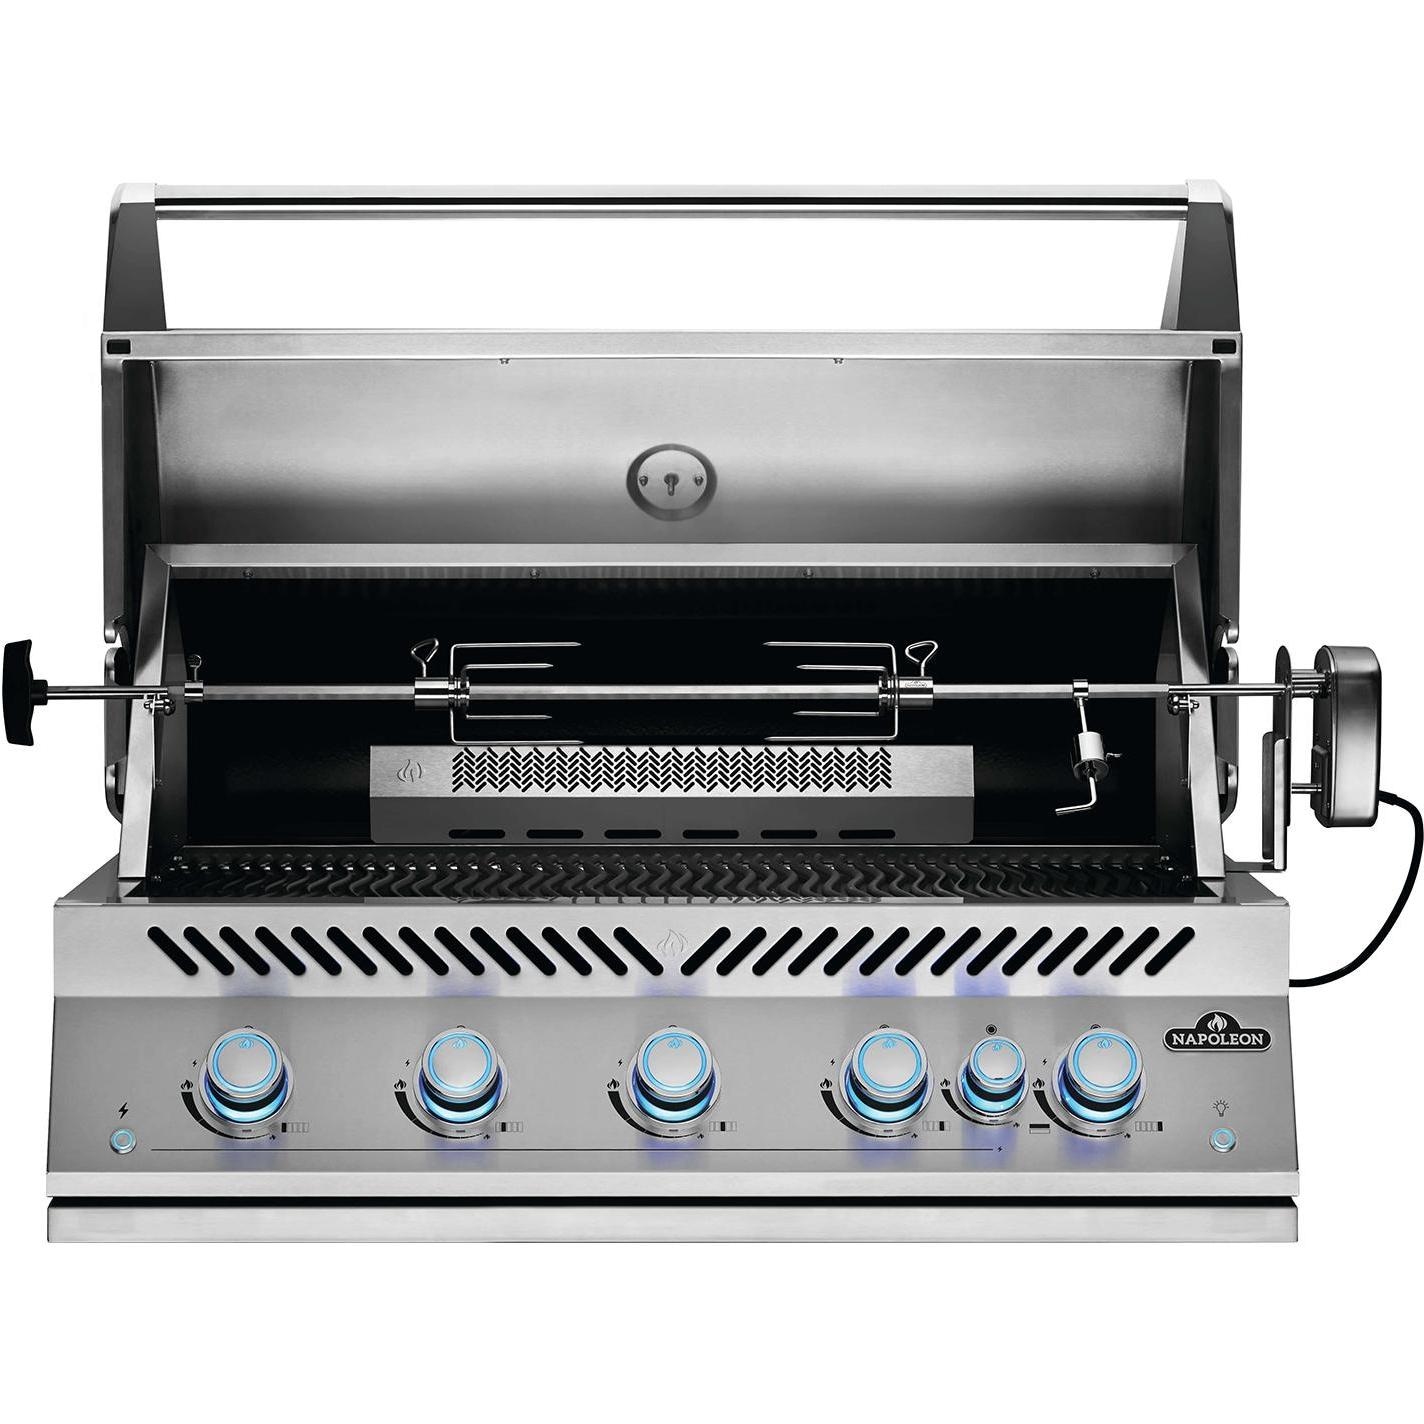 Napoleon Built-In 700 Series 38-Inch Propane Gas Grill w/ Infrared Rear Burner & Rotisserie Kit - BIG38RBPSS - image 5 of 6